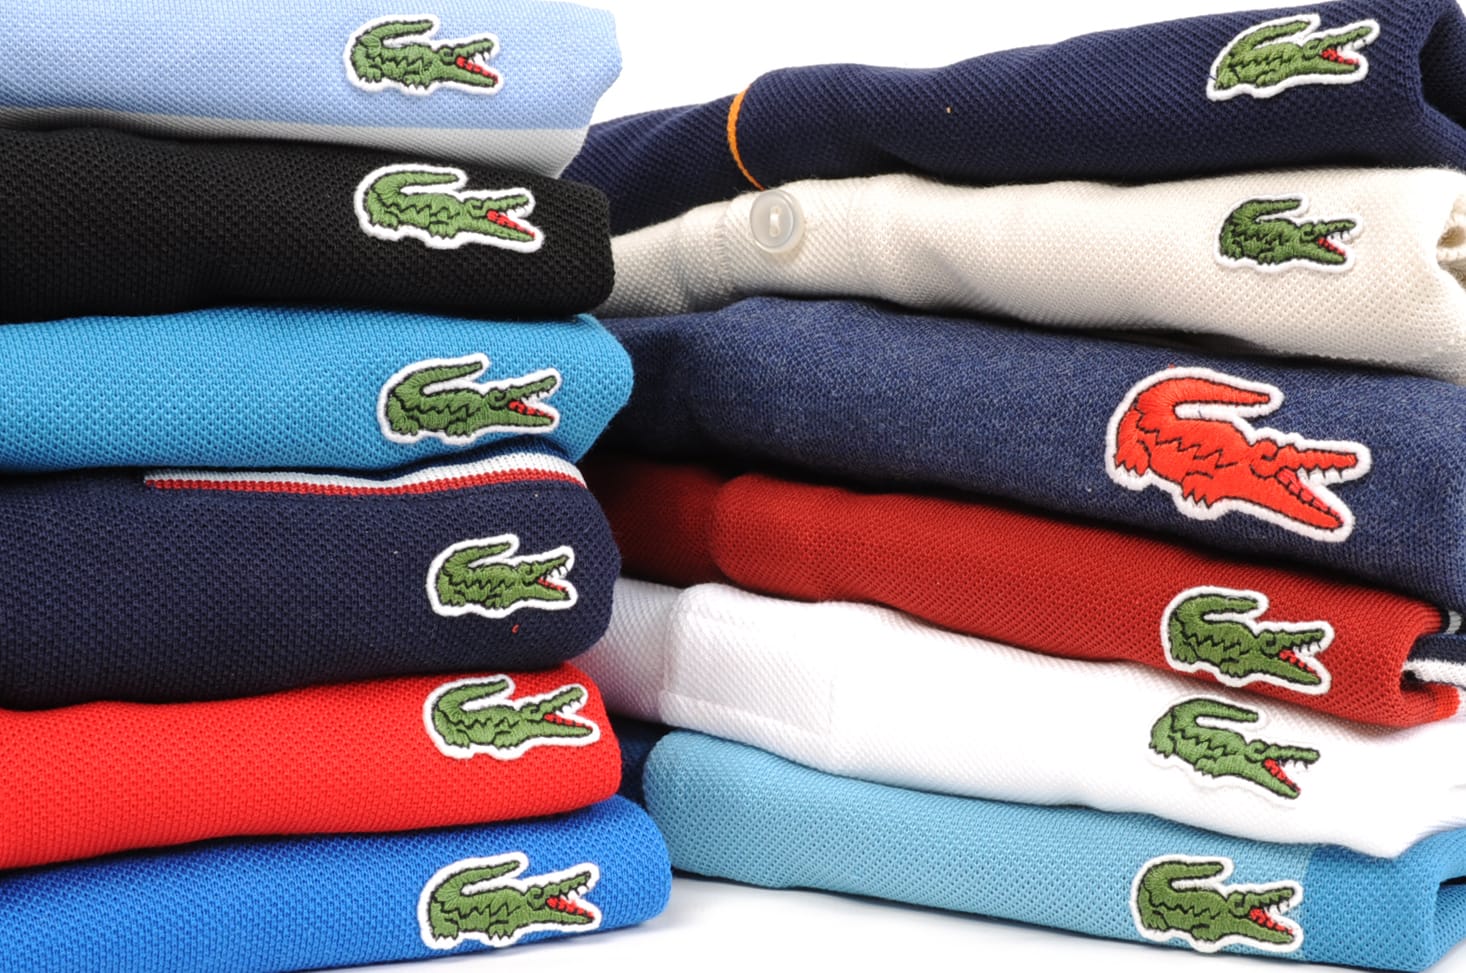 Lacoste trainers polo sale | Buy the history of an iconic brand